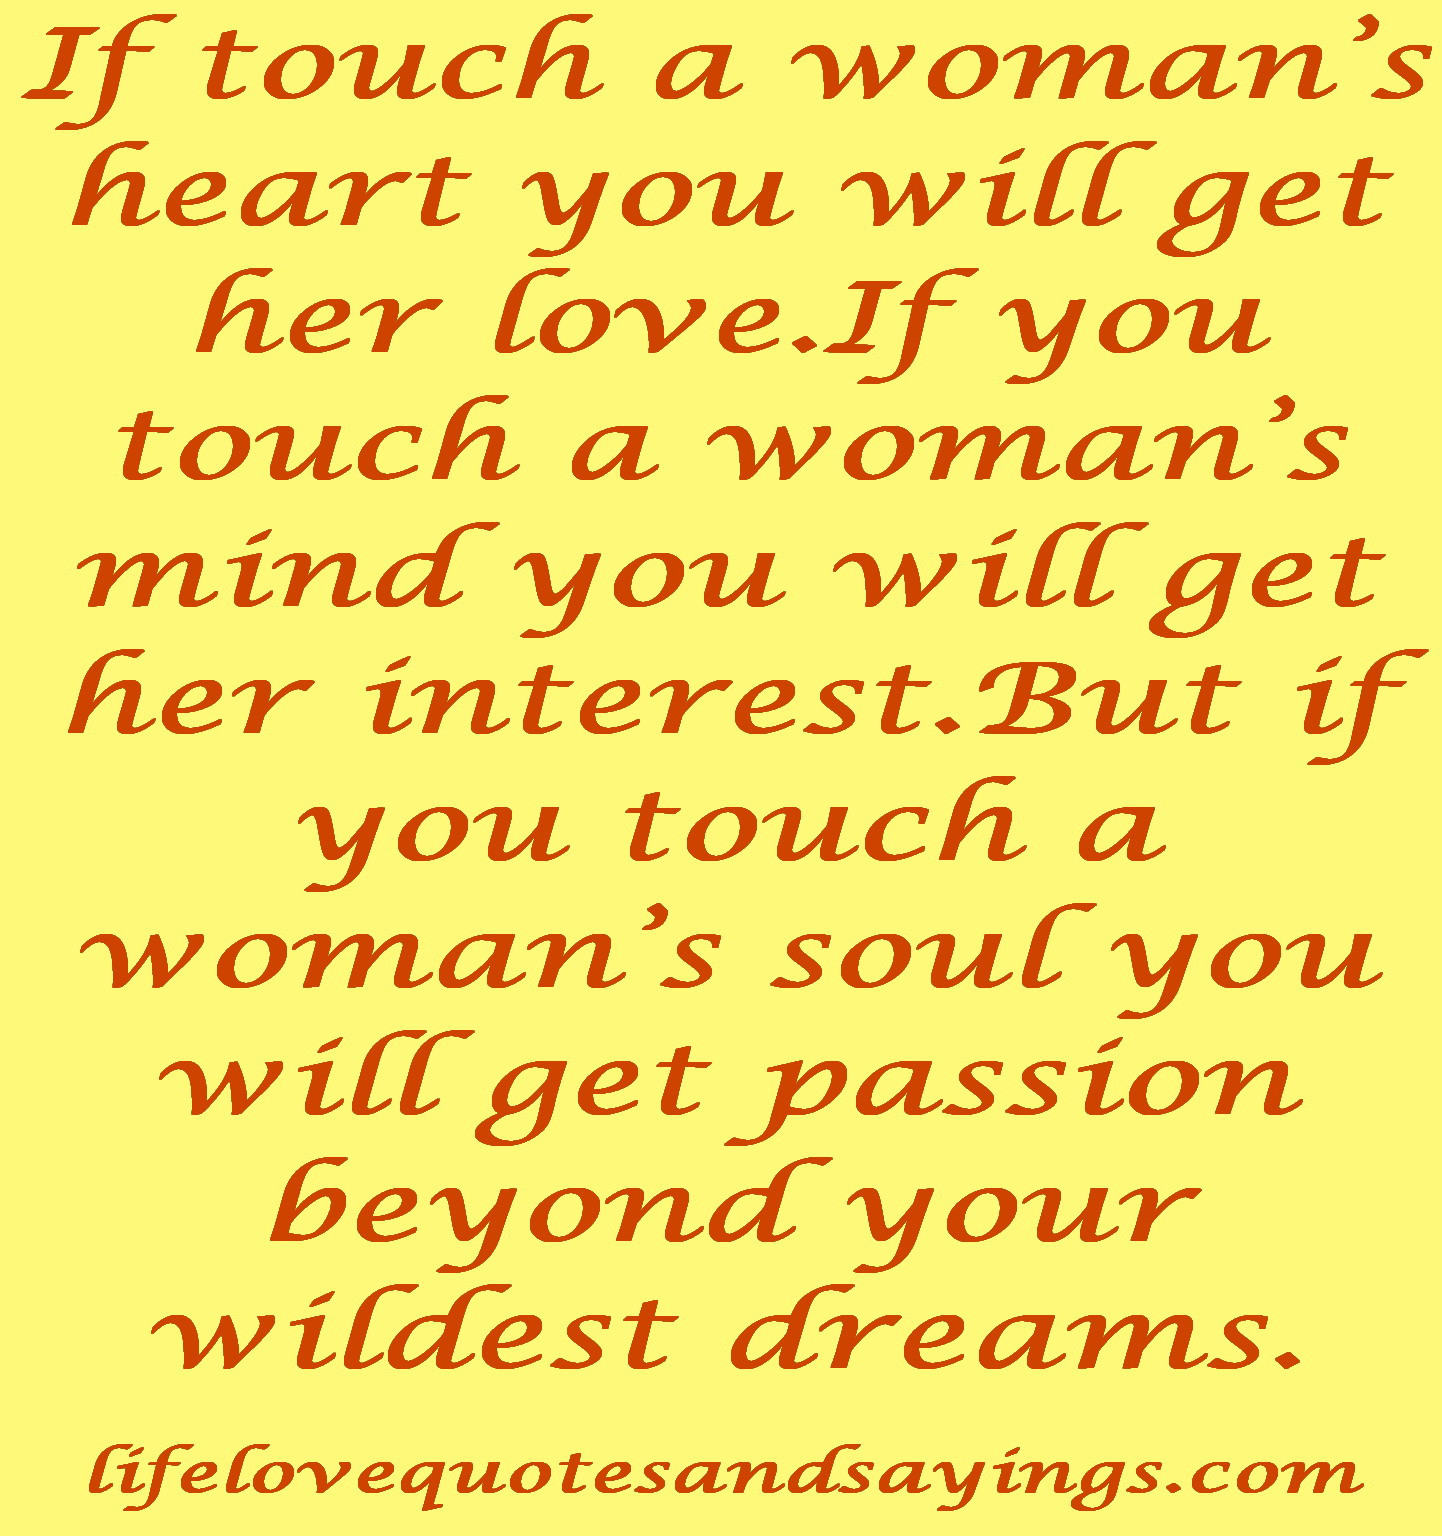 Romantic Quotes For Her From The Heart
 Love Quotes For Her From The Heart And Soul QuotesGram